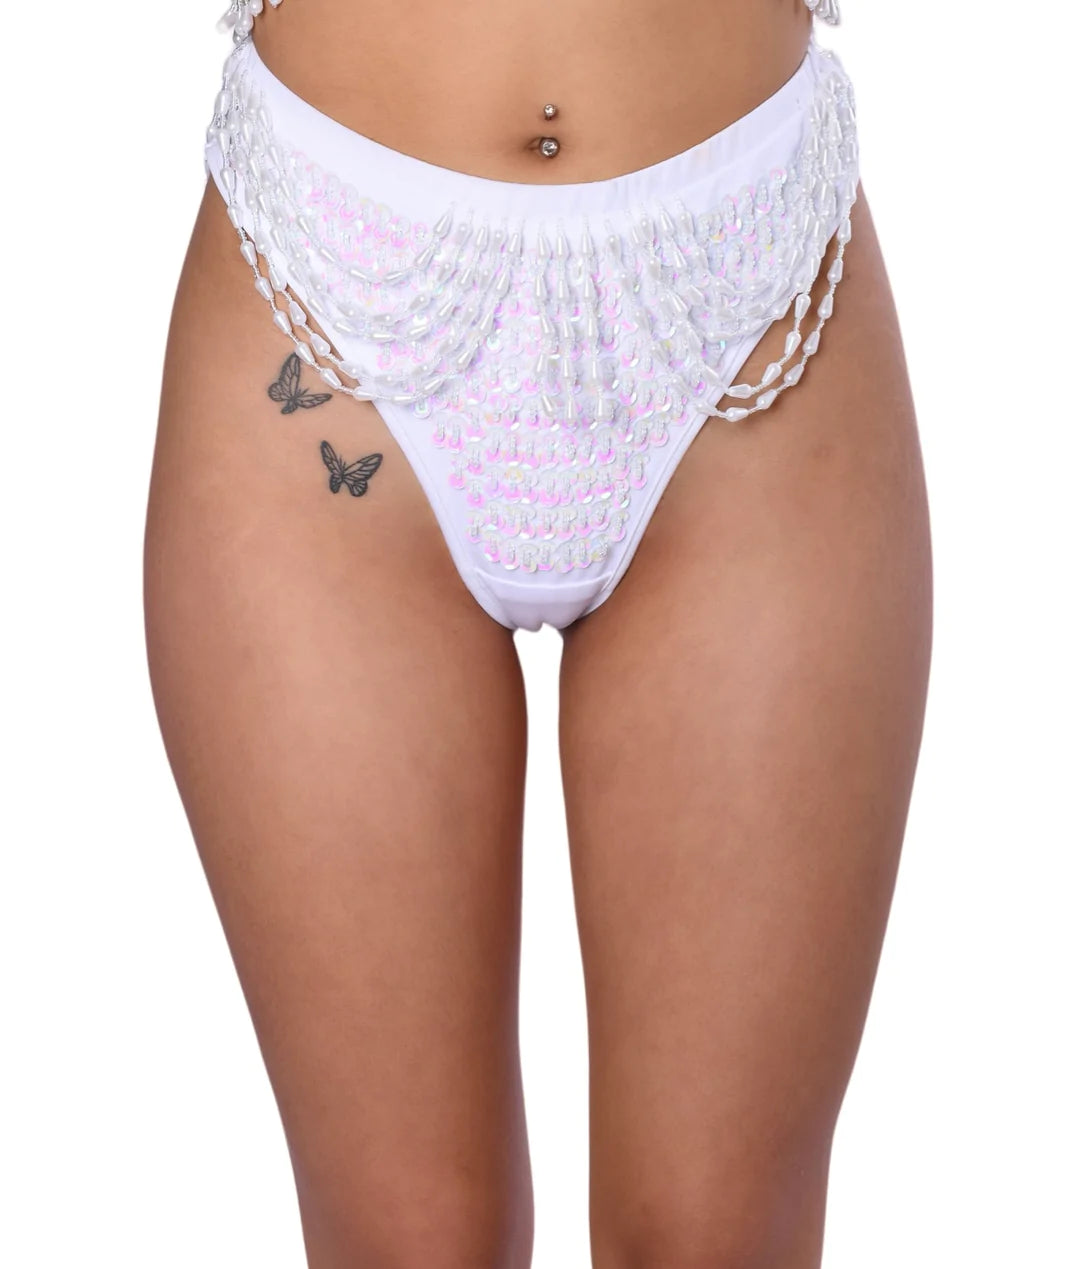 Hand Stitched Sequin Cheeky Bottoms in Techno Doll - 30% OFF